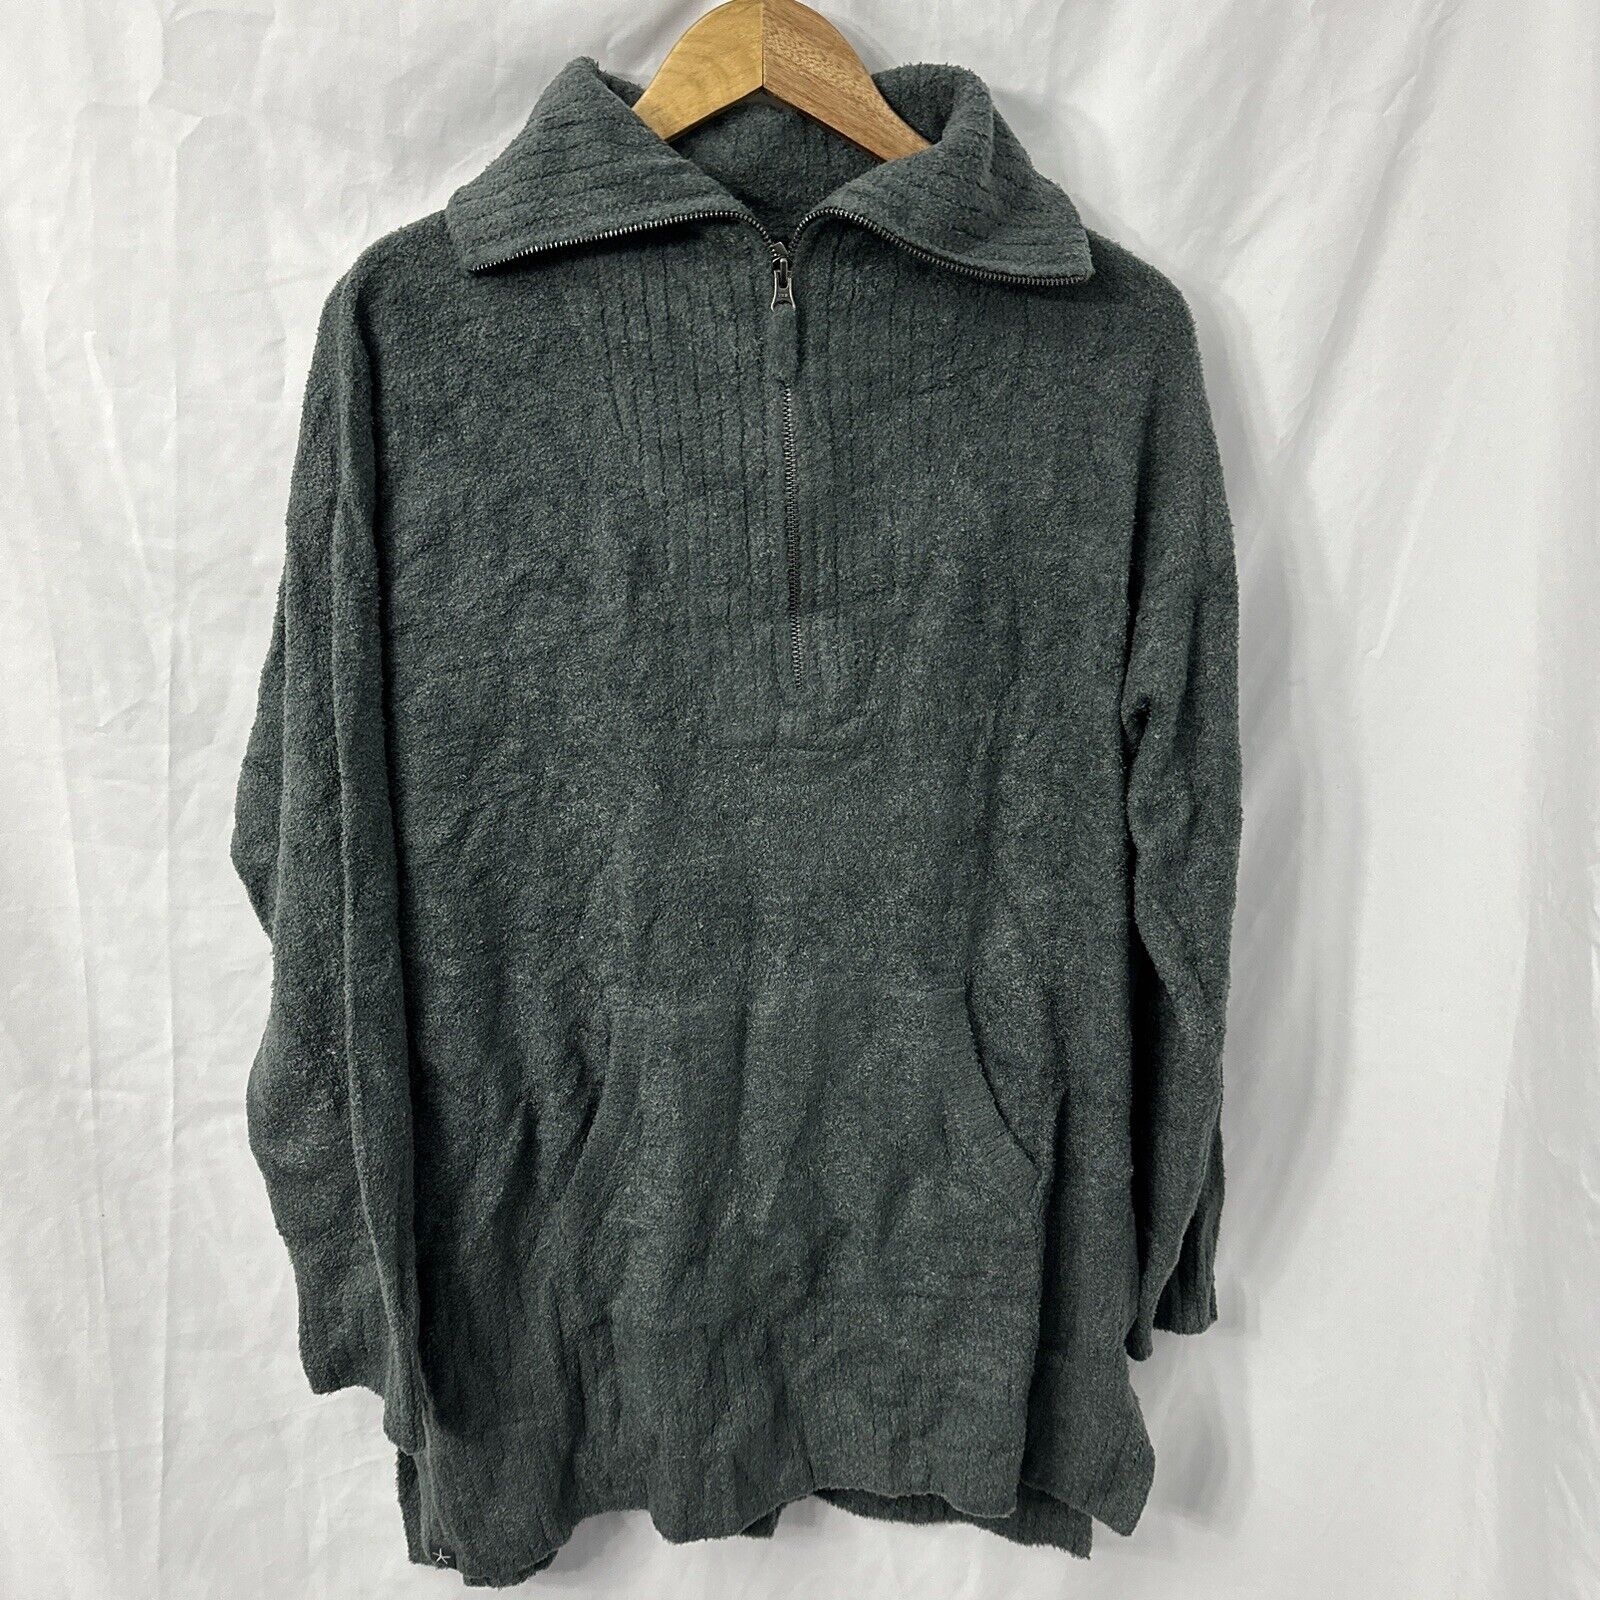 Barefoot Dreams Women's CozyChic Cable Half-Zip Pullover Gray